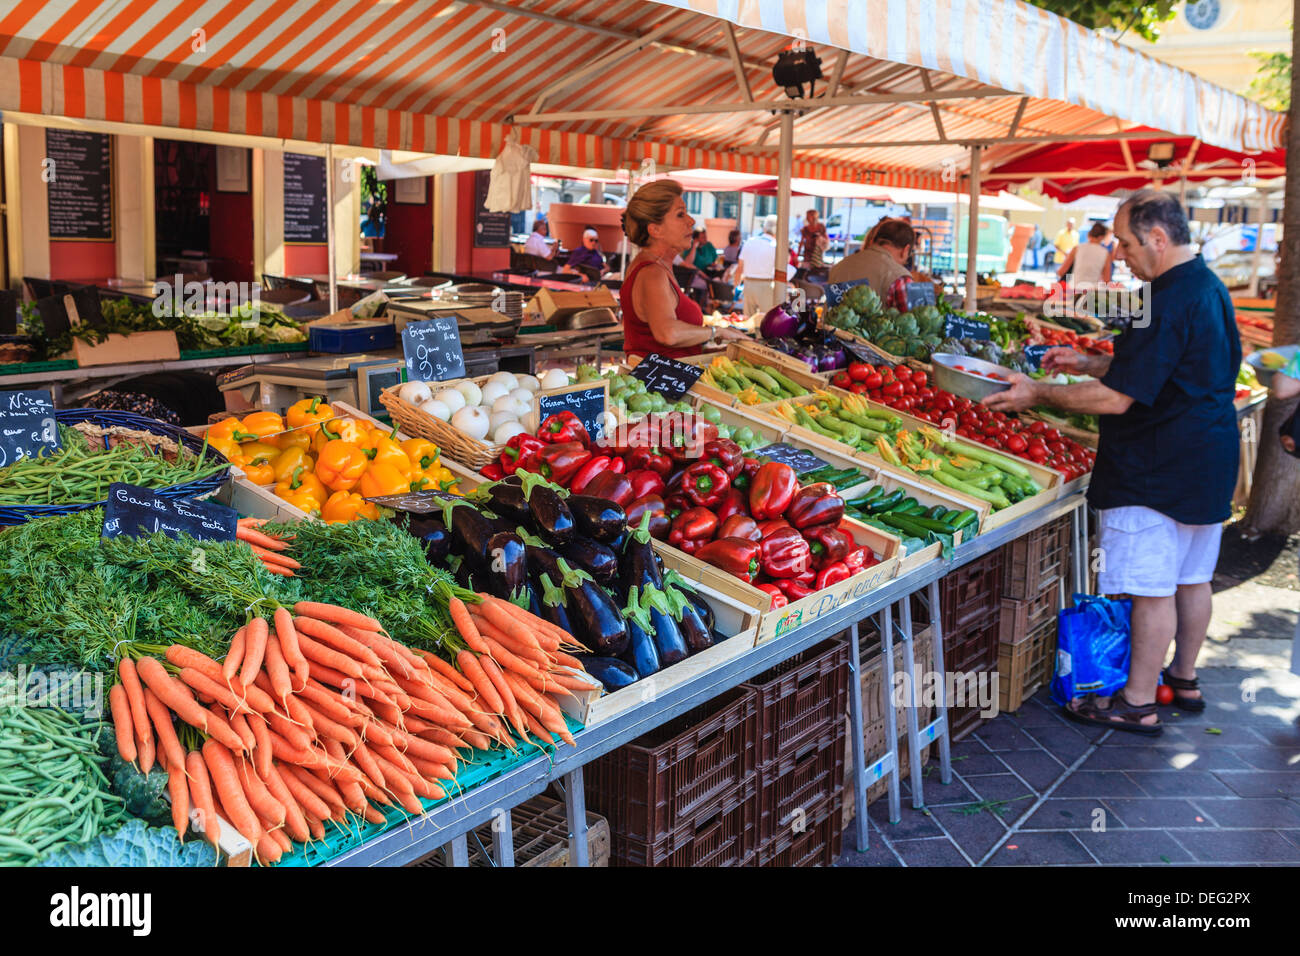 Fruit and vegetable market in Cours Saleya, Old Town, Nice, Alpes-Maritimes, Provence, Cote d'Azur, French Riviera, France Stock Photo